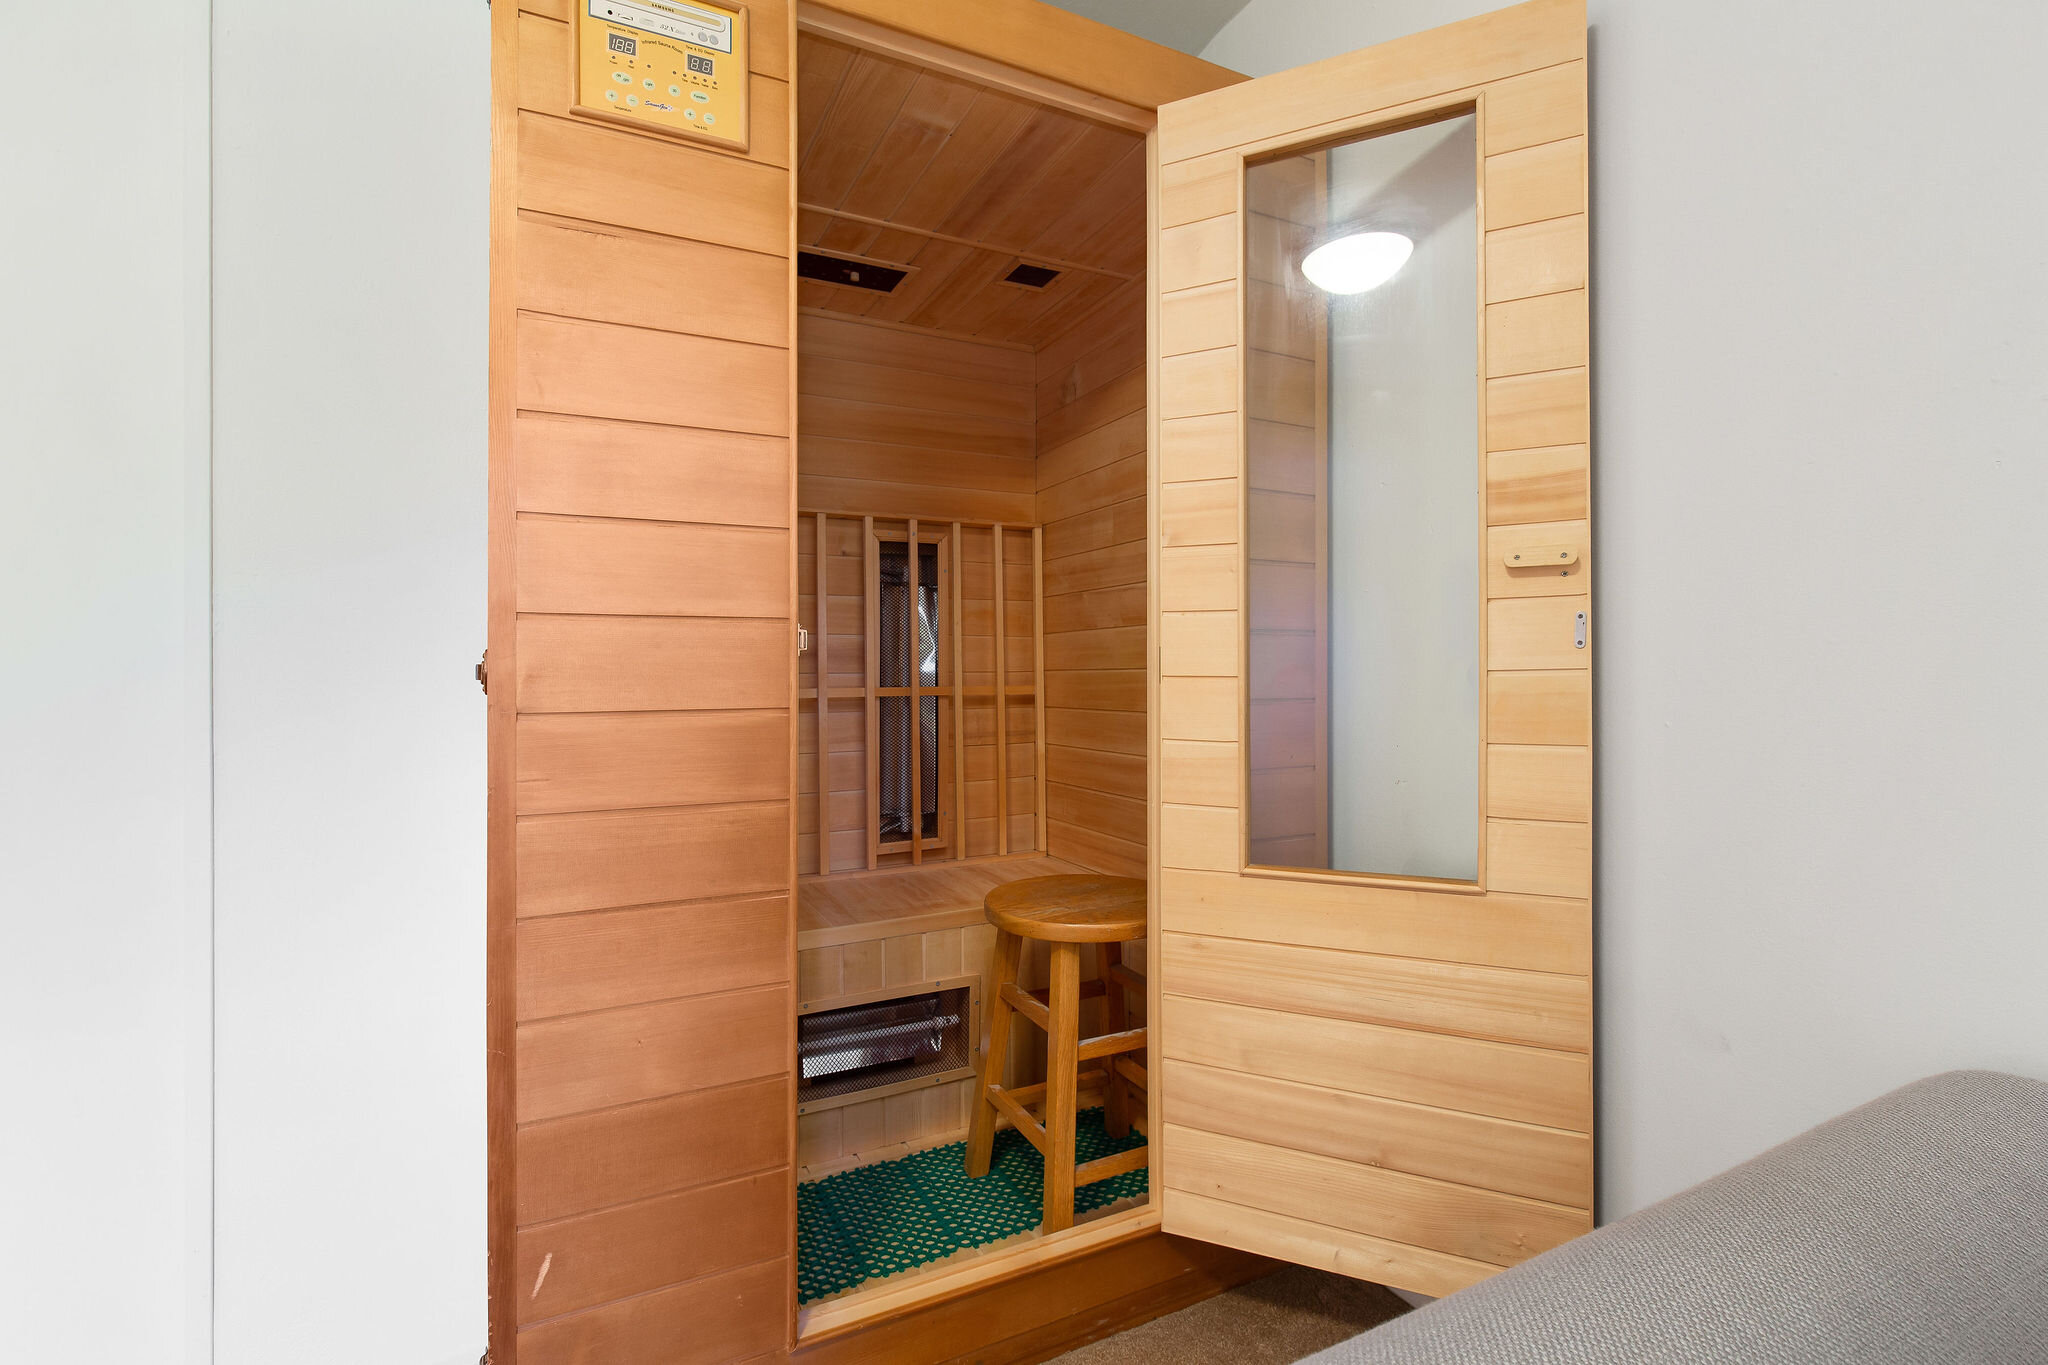  A wonderful treat to get warm and cozy in the wood/infrared sauna. 